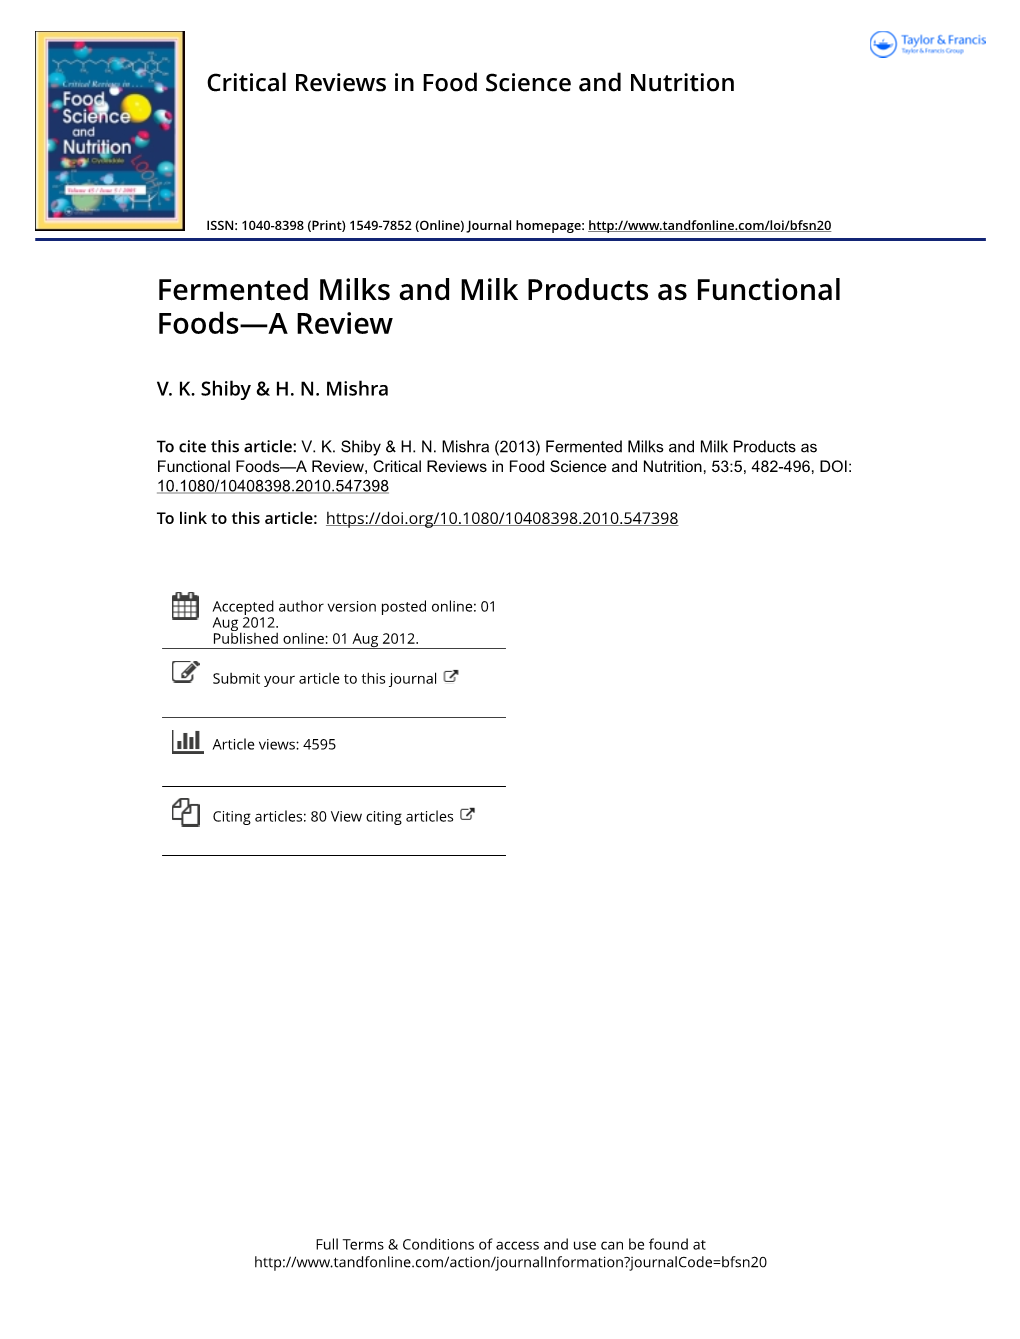 Fermented Milks and Milk Products As Functional Foods—A Review